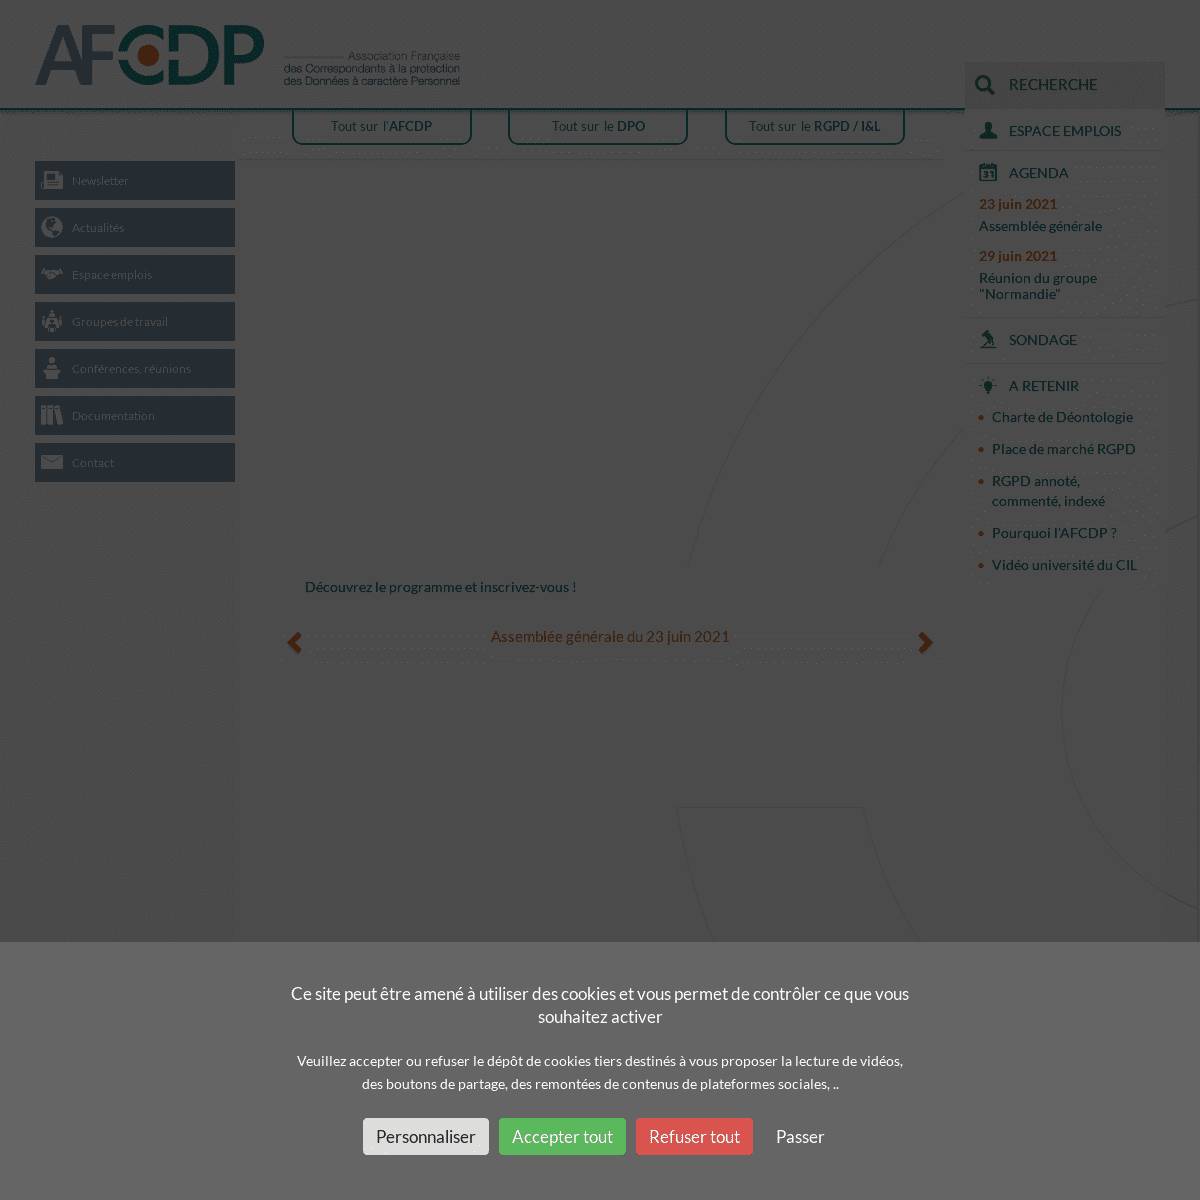 A complete backup of https://afcdp.net